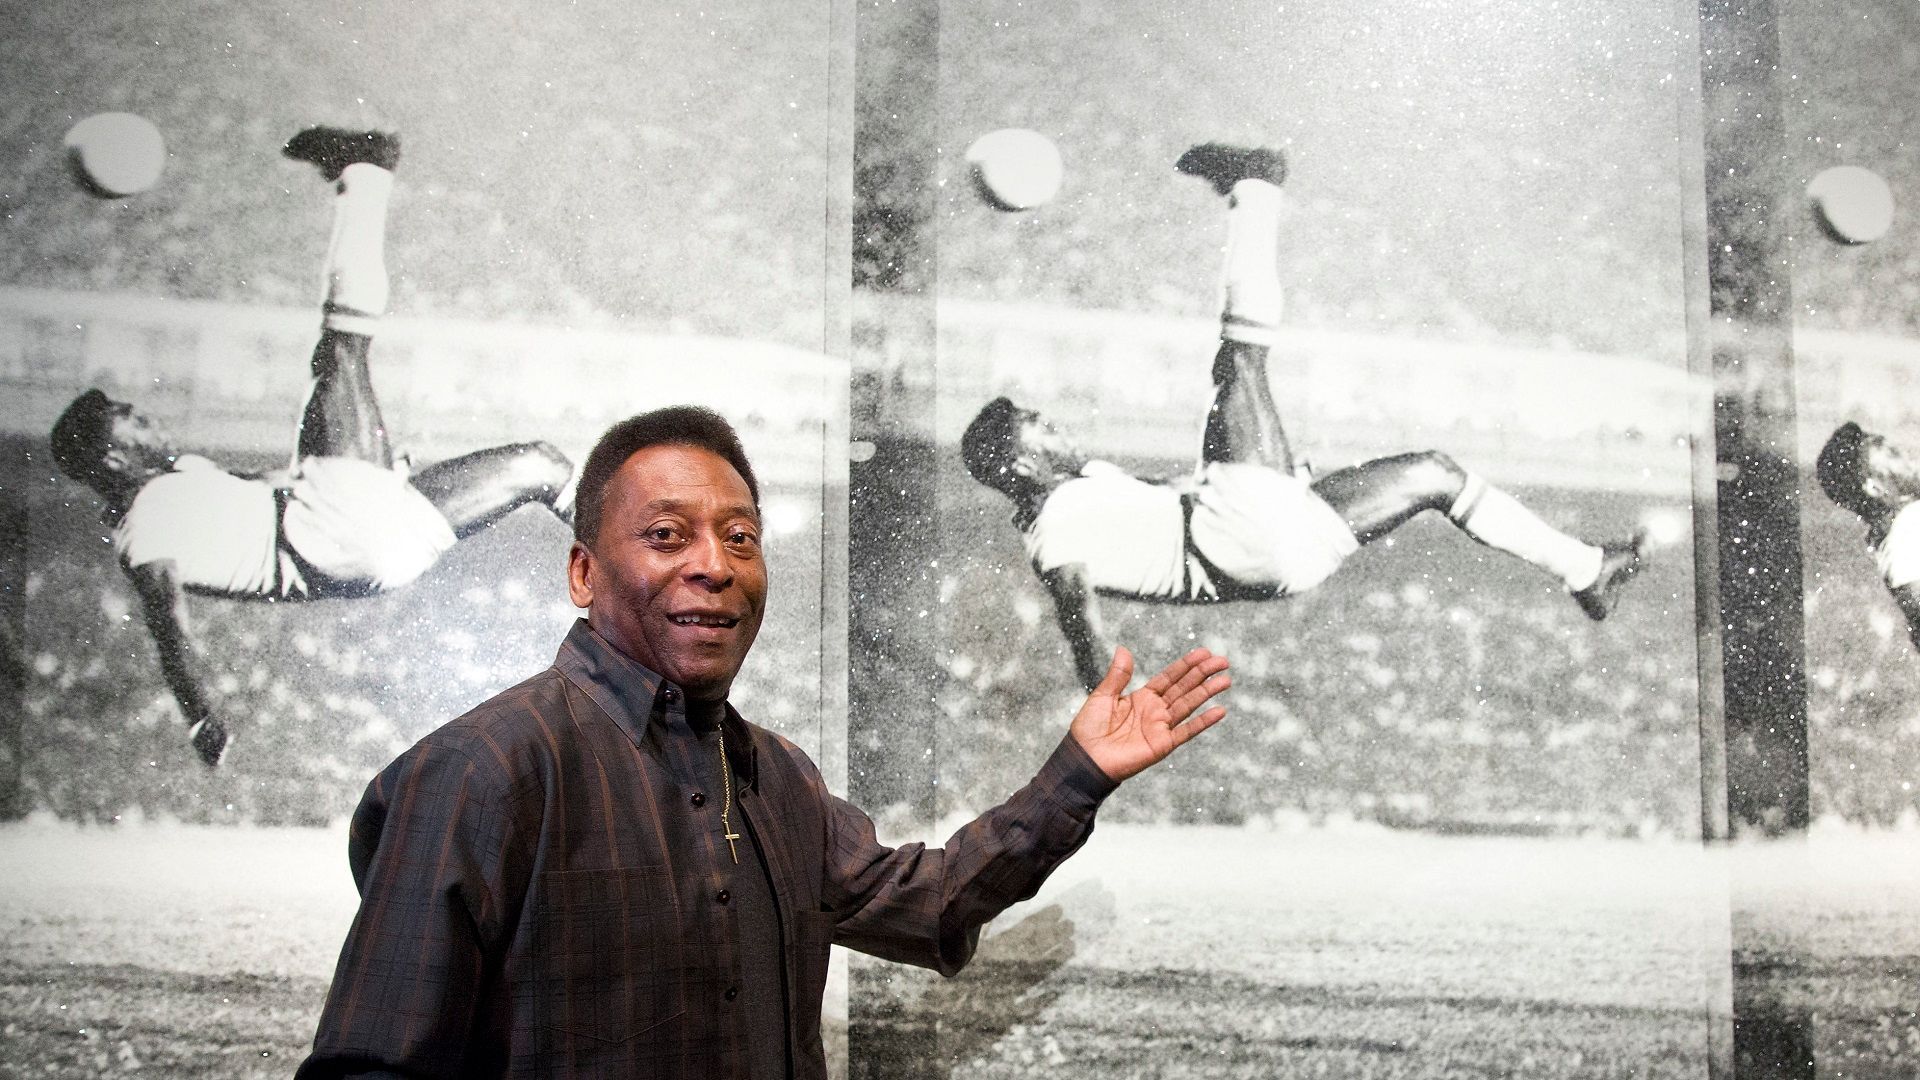 ESPN FC on X: Pelé remains the only player to ever win THREE